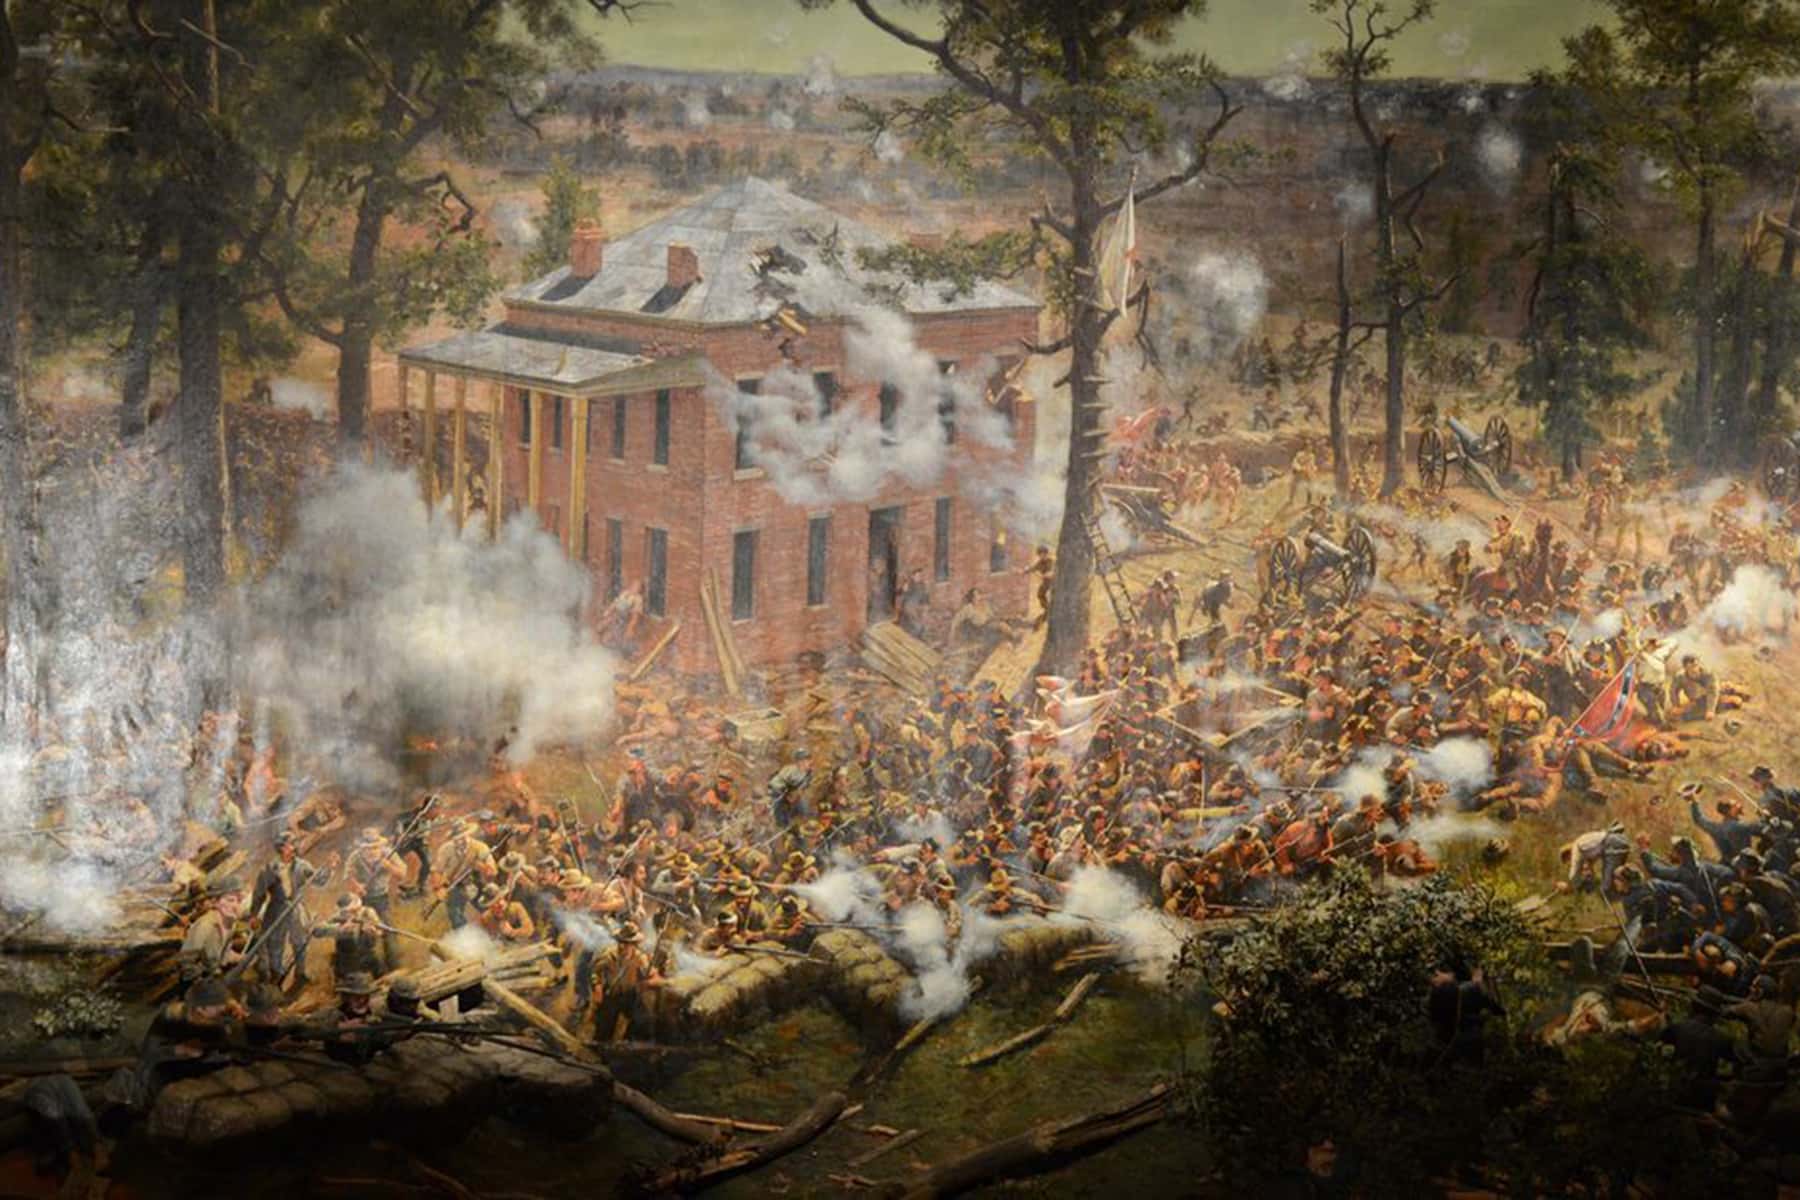 Spectacles of American Nationalism: The Battle of Atlanta Cyclorama  Painting and The Birth of a Nation - Southern Spaces